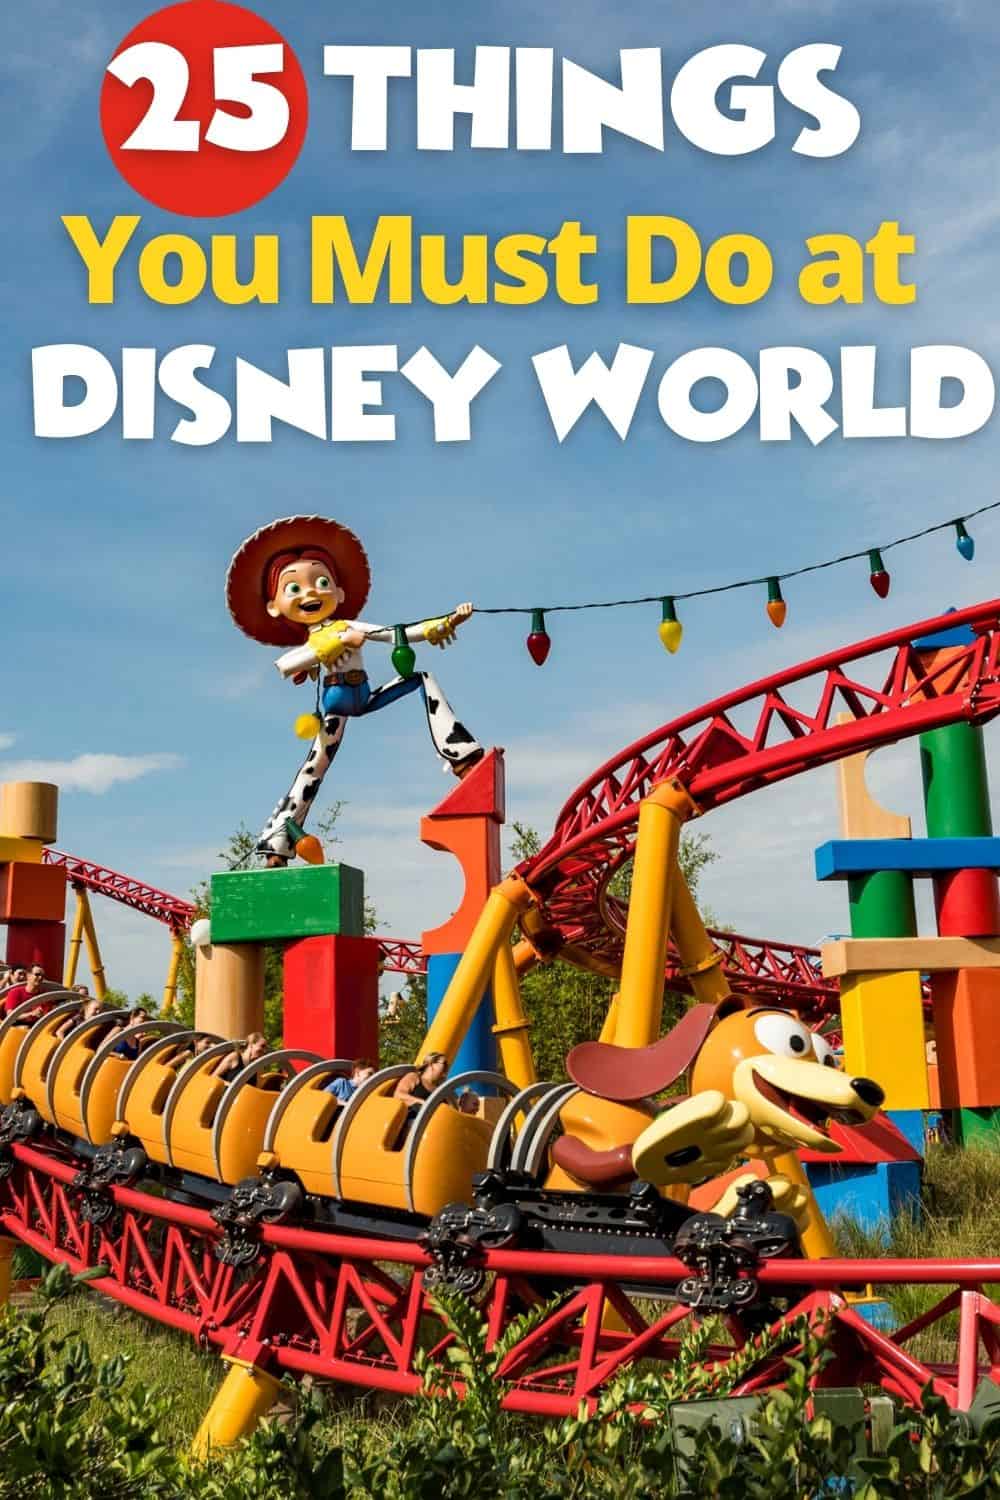 25 Things You Must Do at Disney World